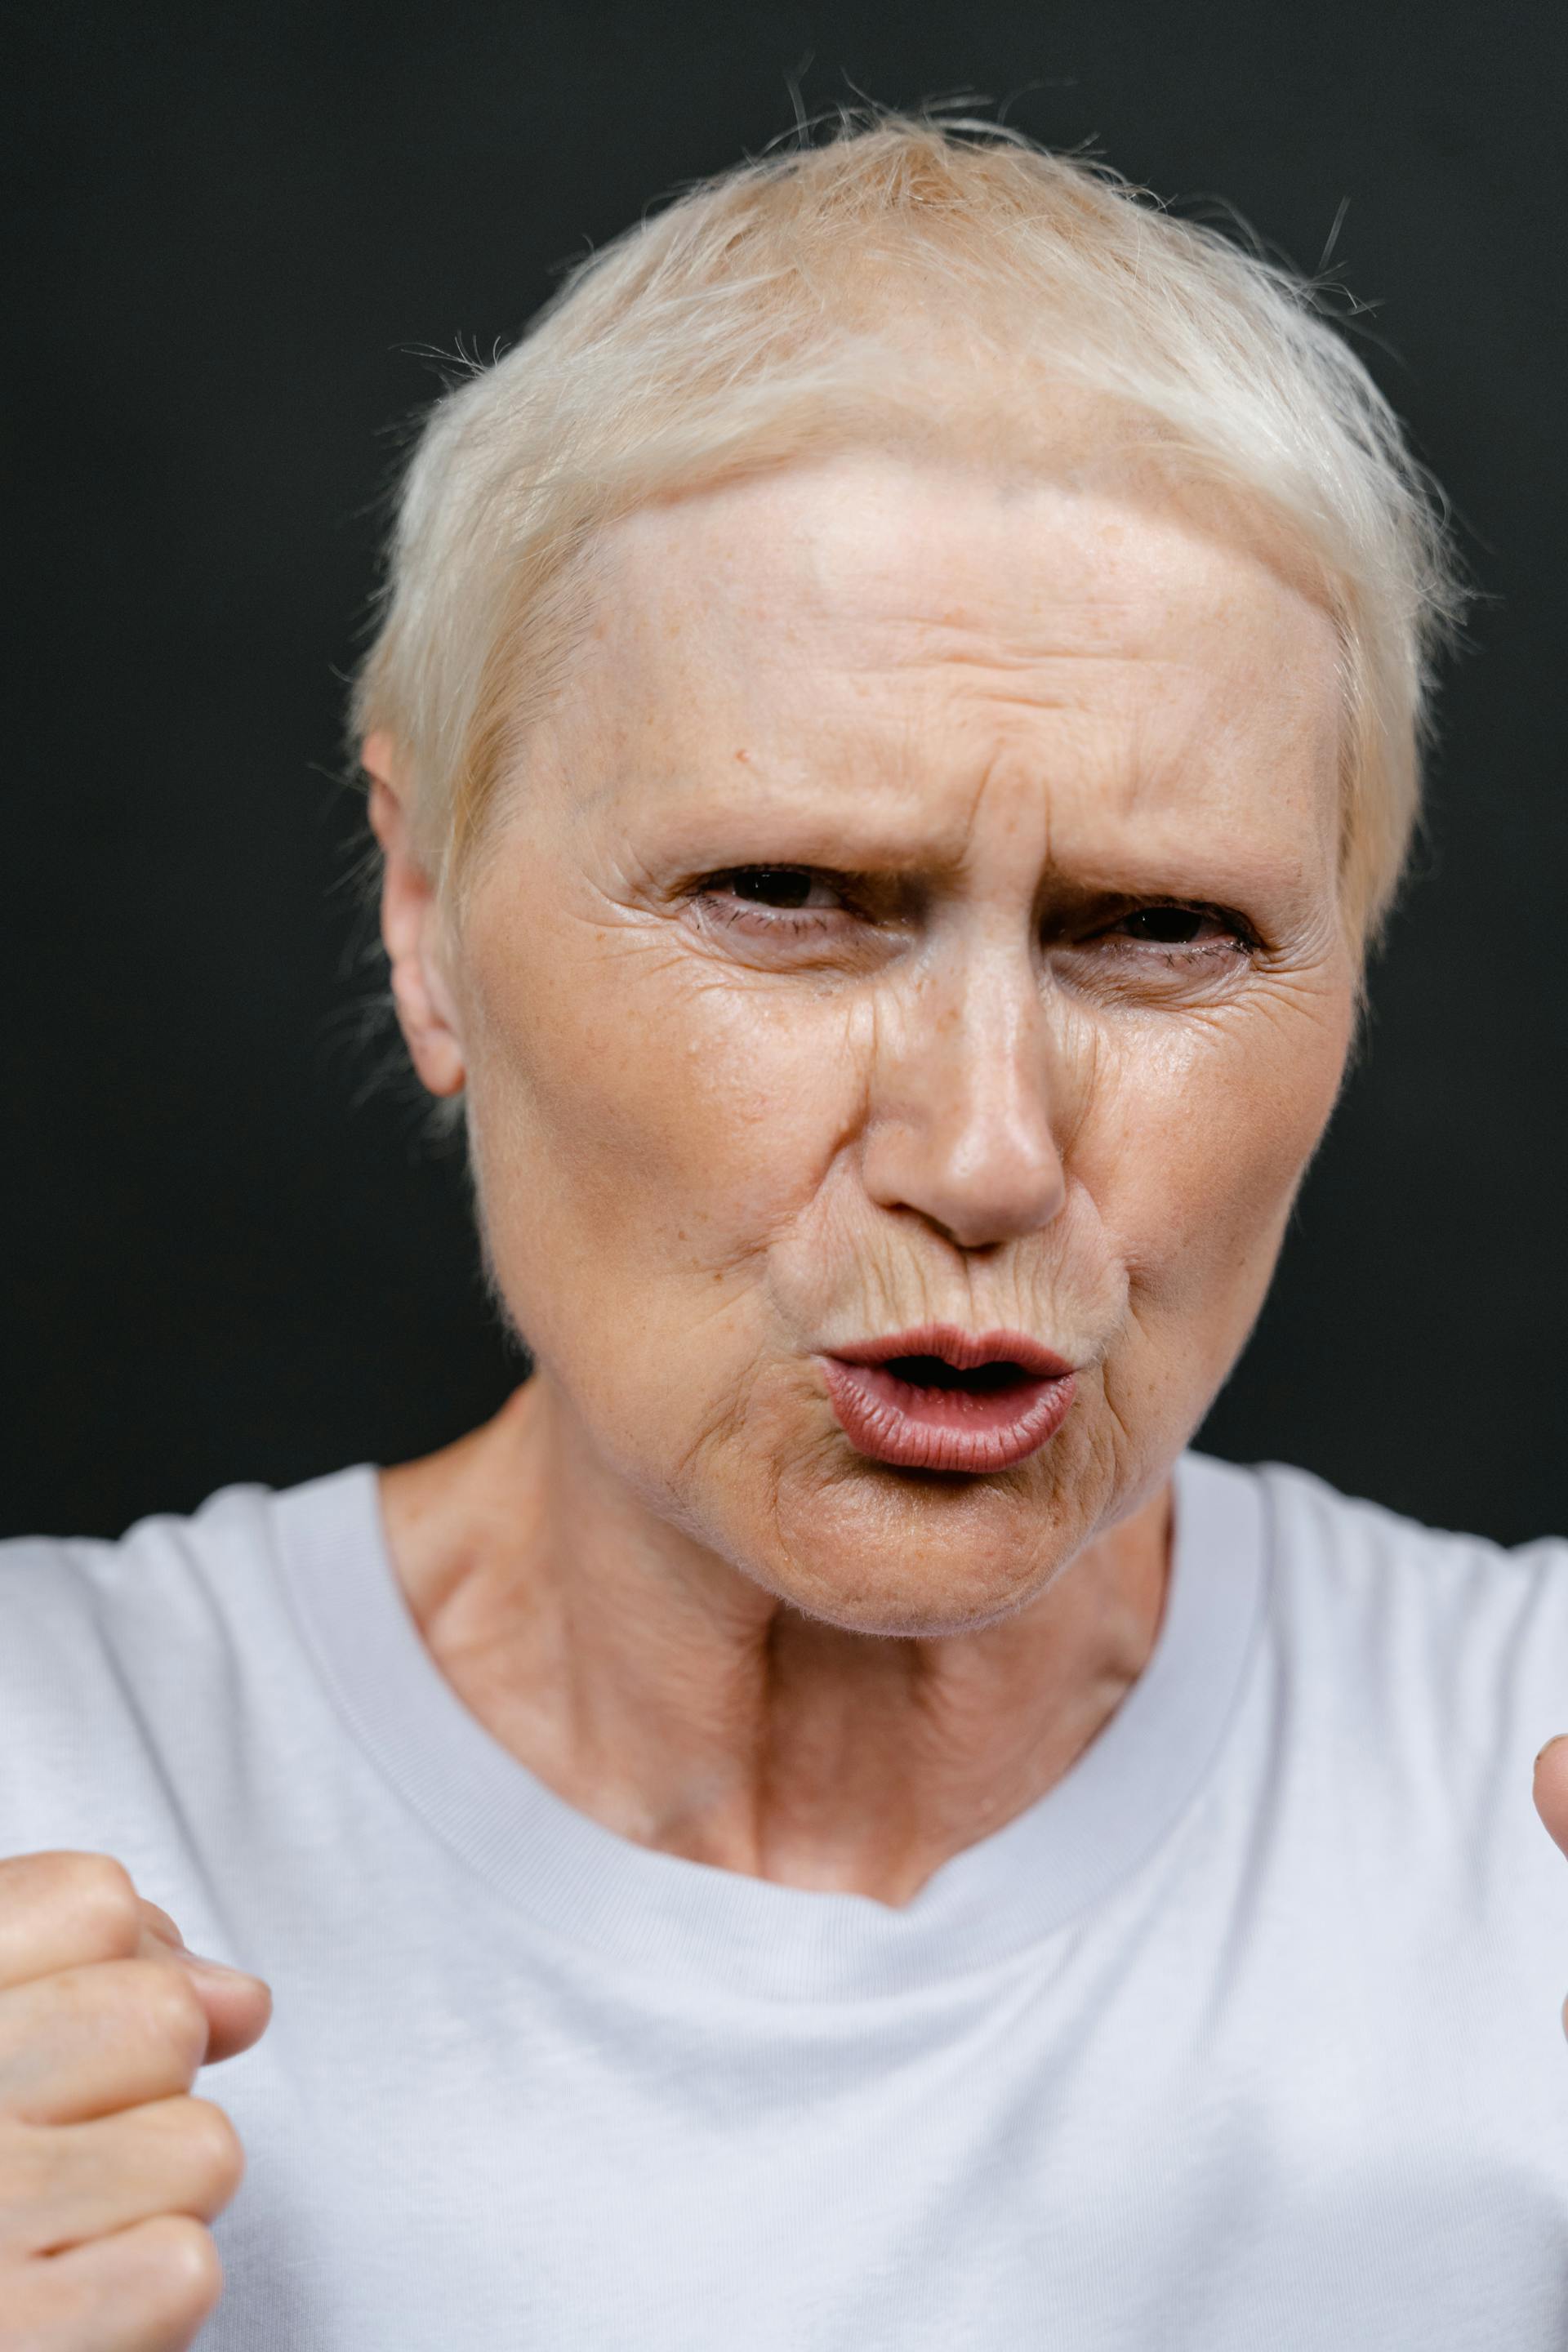 A close-up photo of an angry senior woman | Source: Pexels